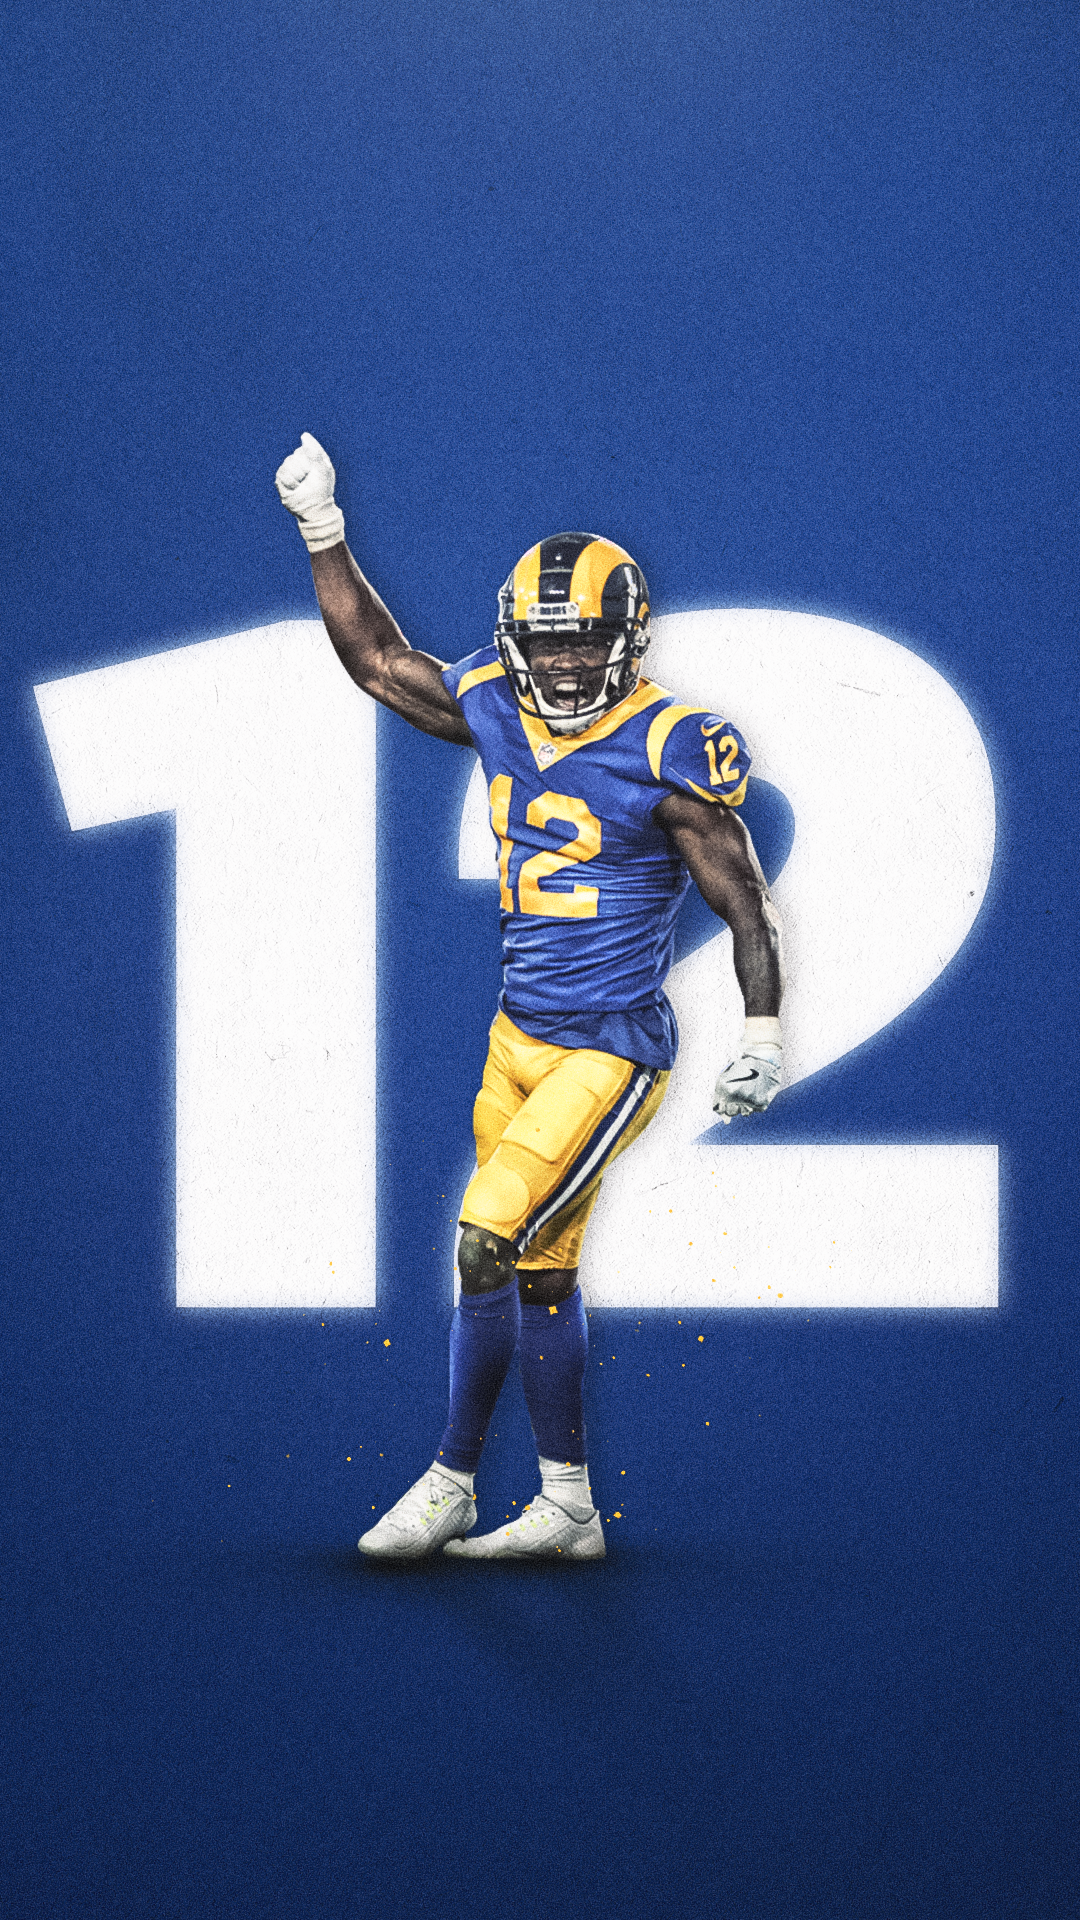 Rams Ultimate jersey concept by @designedbyfranco on Instagram : r